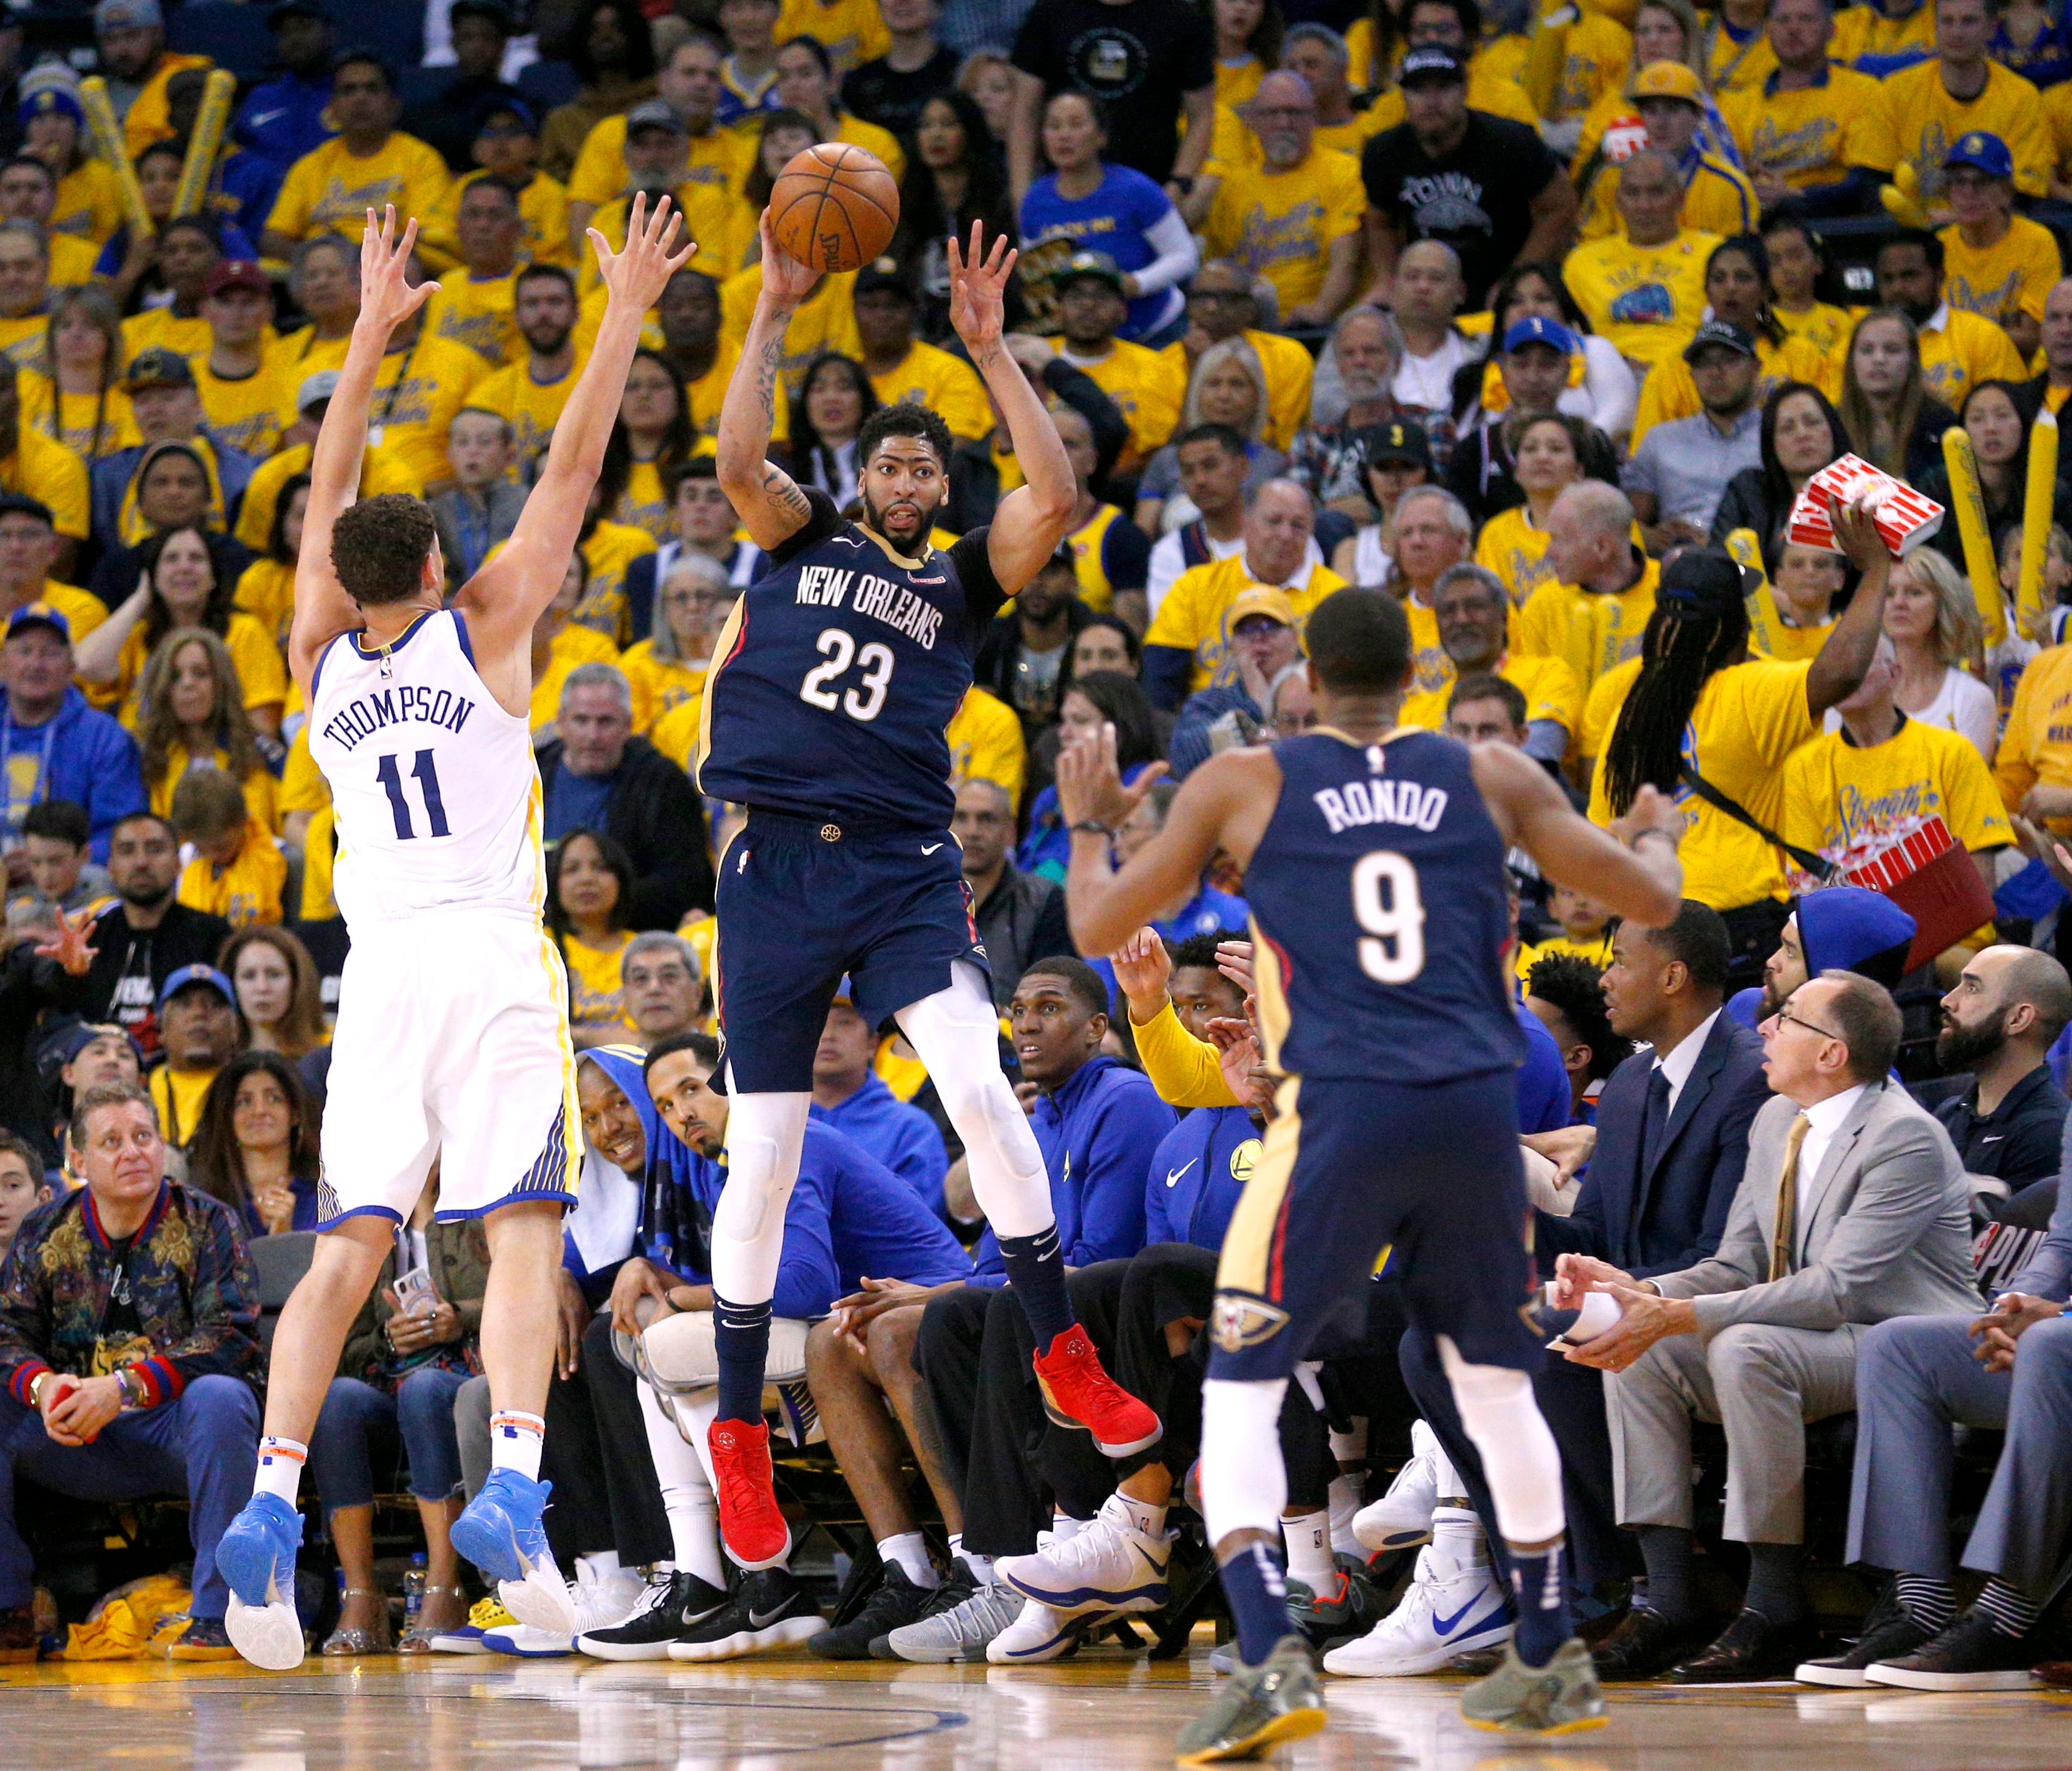 New Orleans Pelicans forward Anthony Davis (23) saves the ball from going out of bounds next to Golden State Warriors guard Klay Thompson (11) in the third quarter in game one of the second round of the 2018 NBA Playoffs at Oracle Arena.